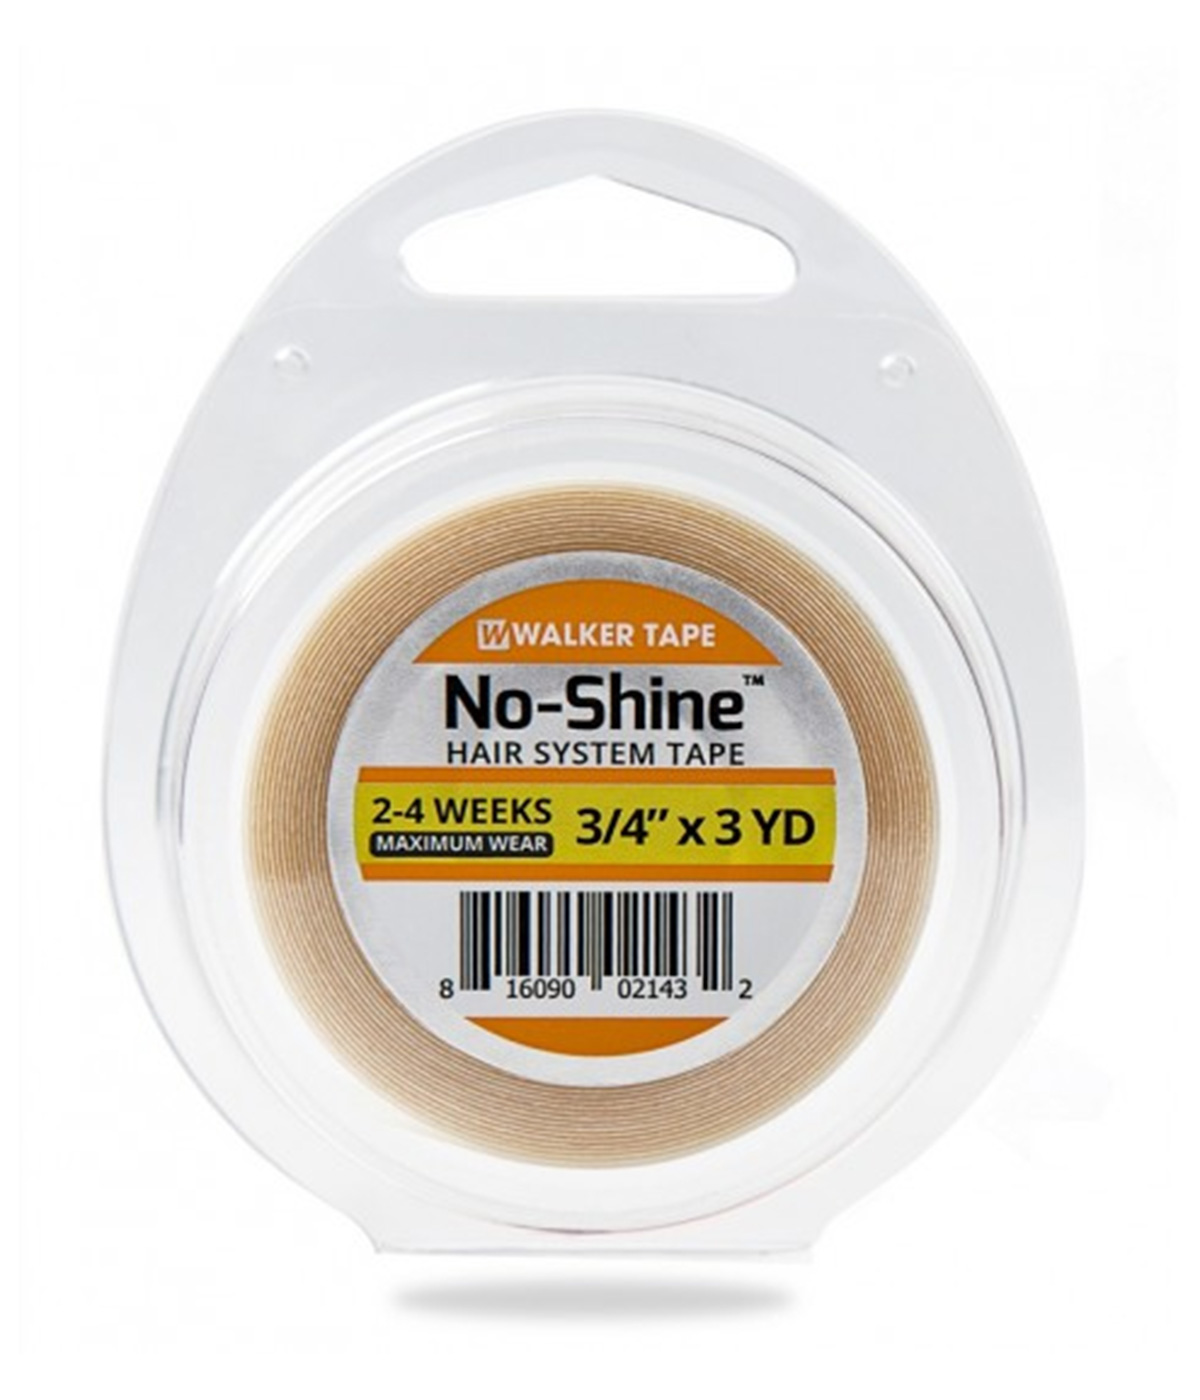 No-Shine Hair System Tape in Roll